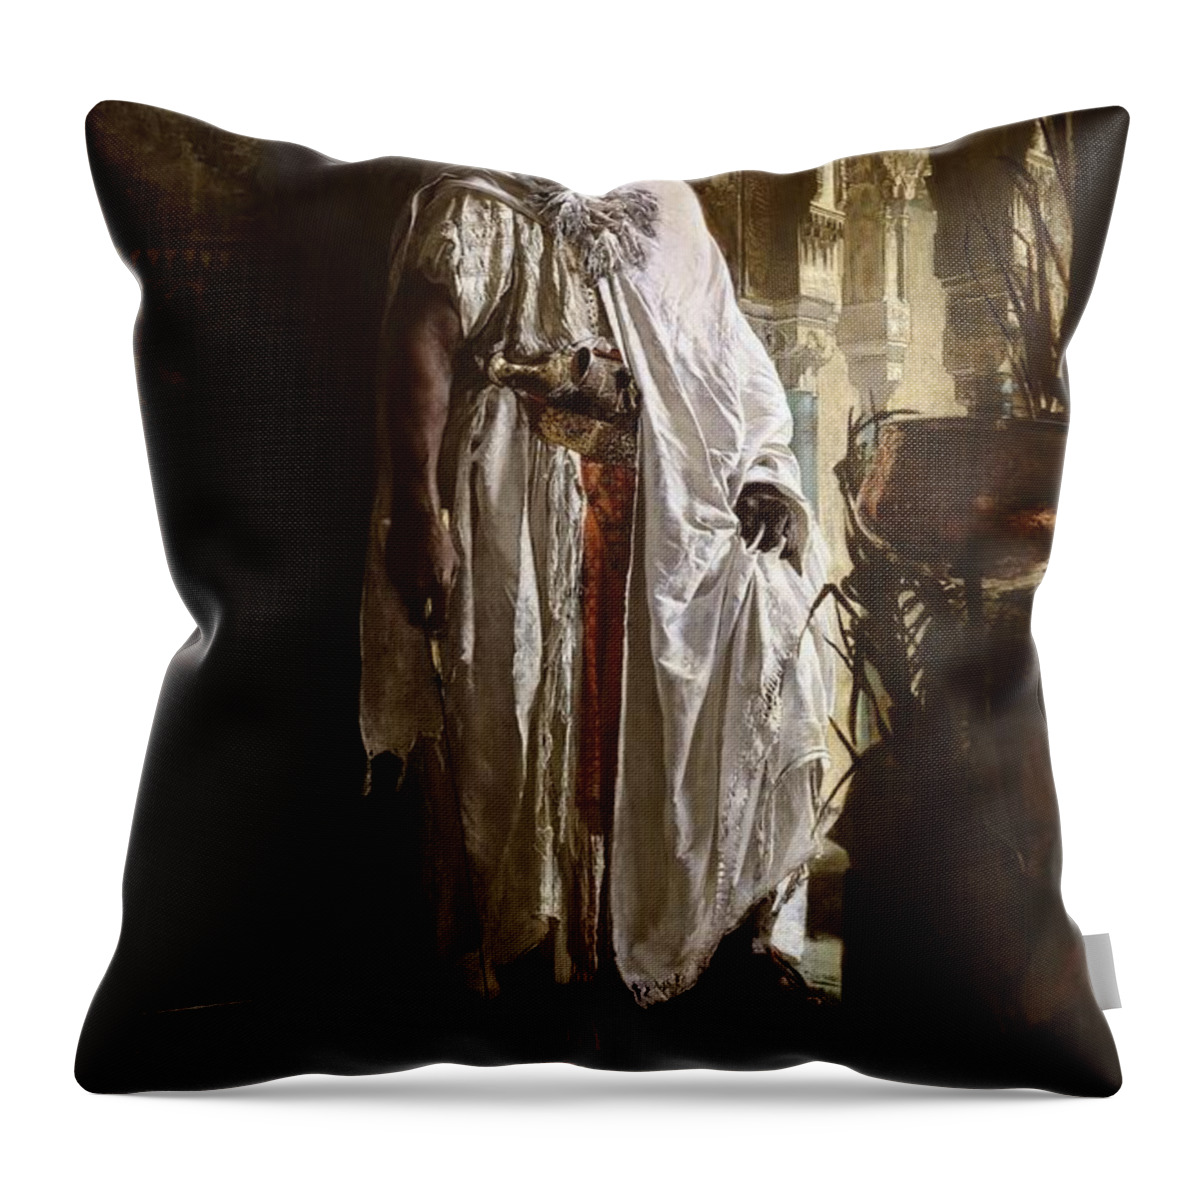 Eduard Charlemont Throw Pillow featuring the painting Eduard Charlemont, Austrian, by MotionAge Designs